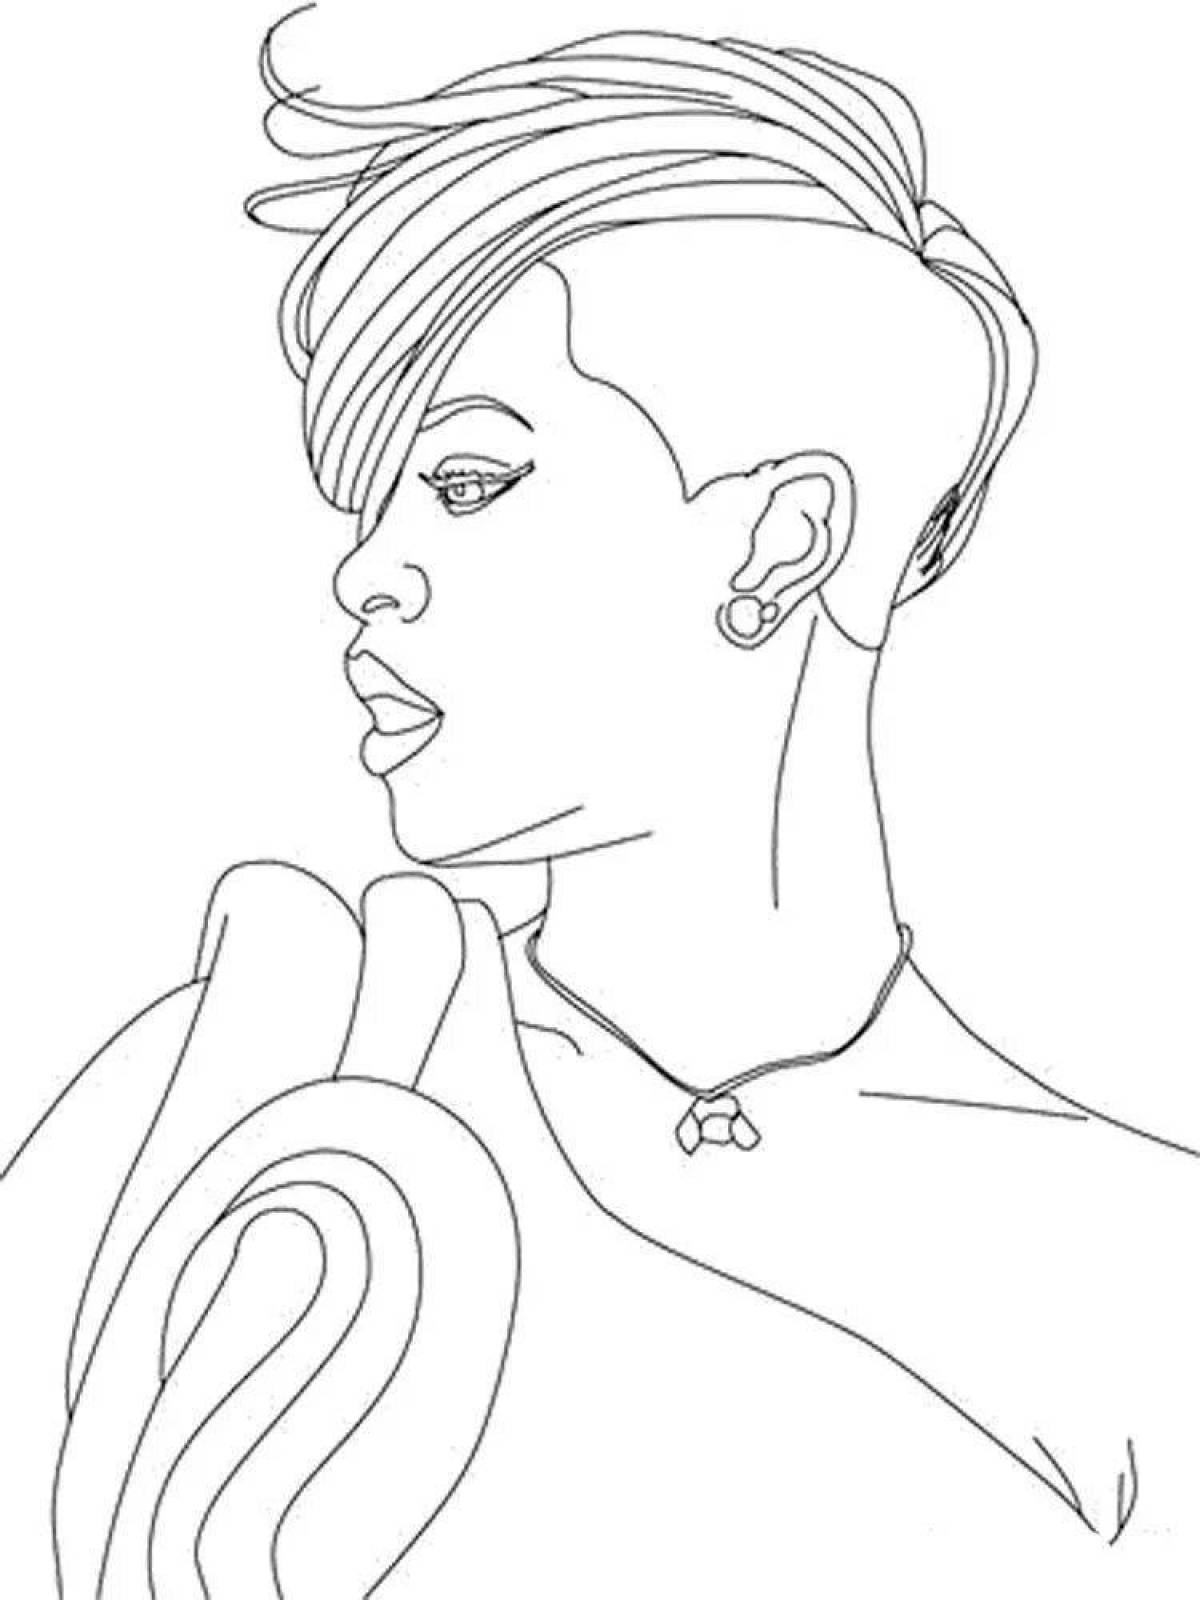 Rihanna's gorgeous coloring page